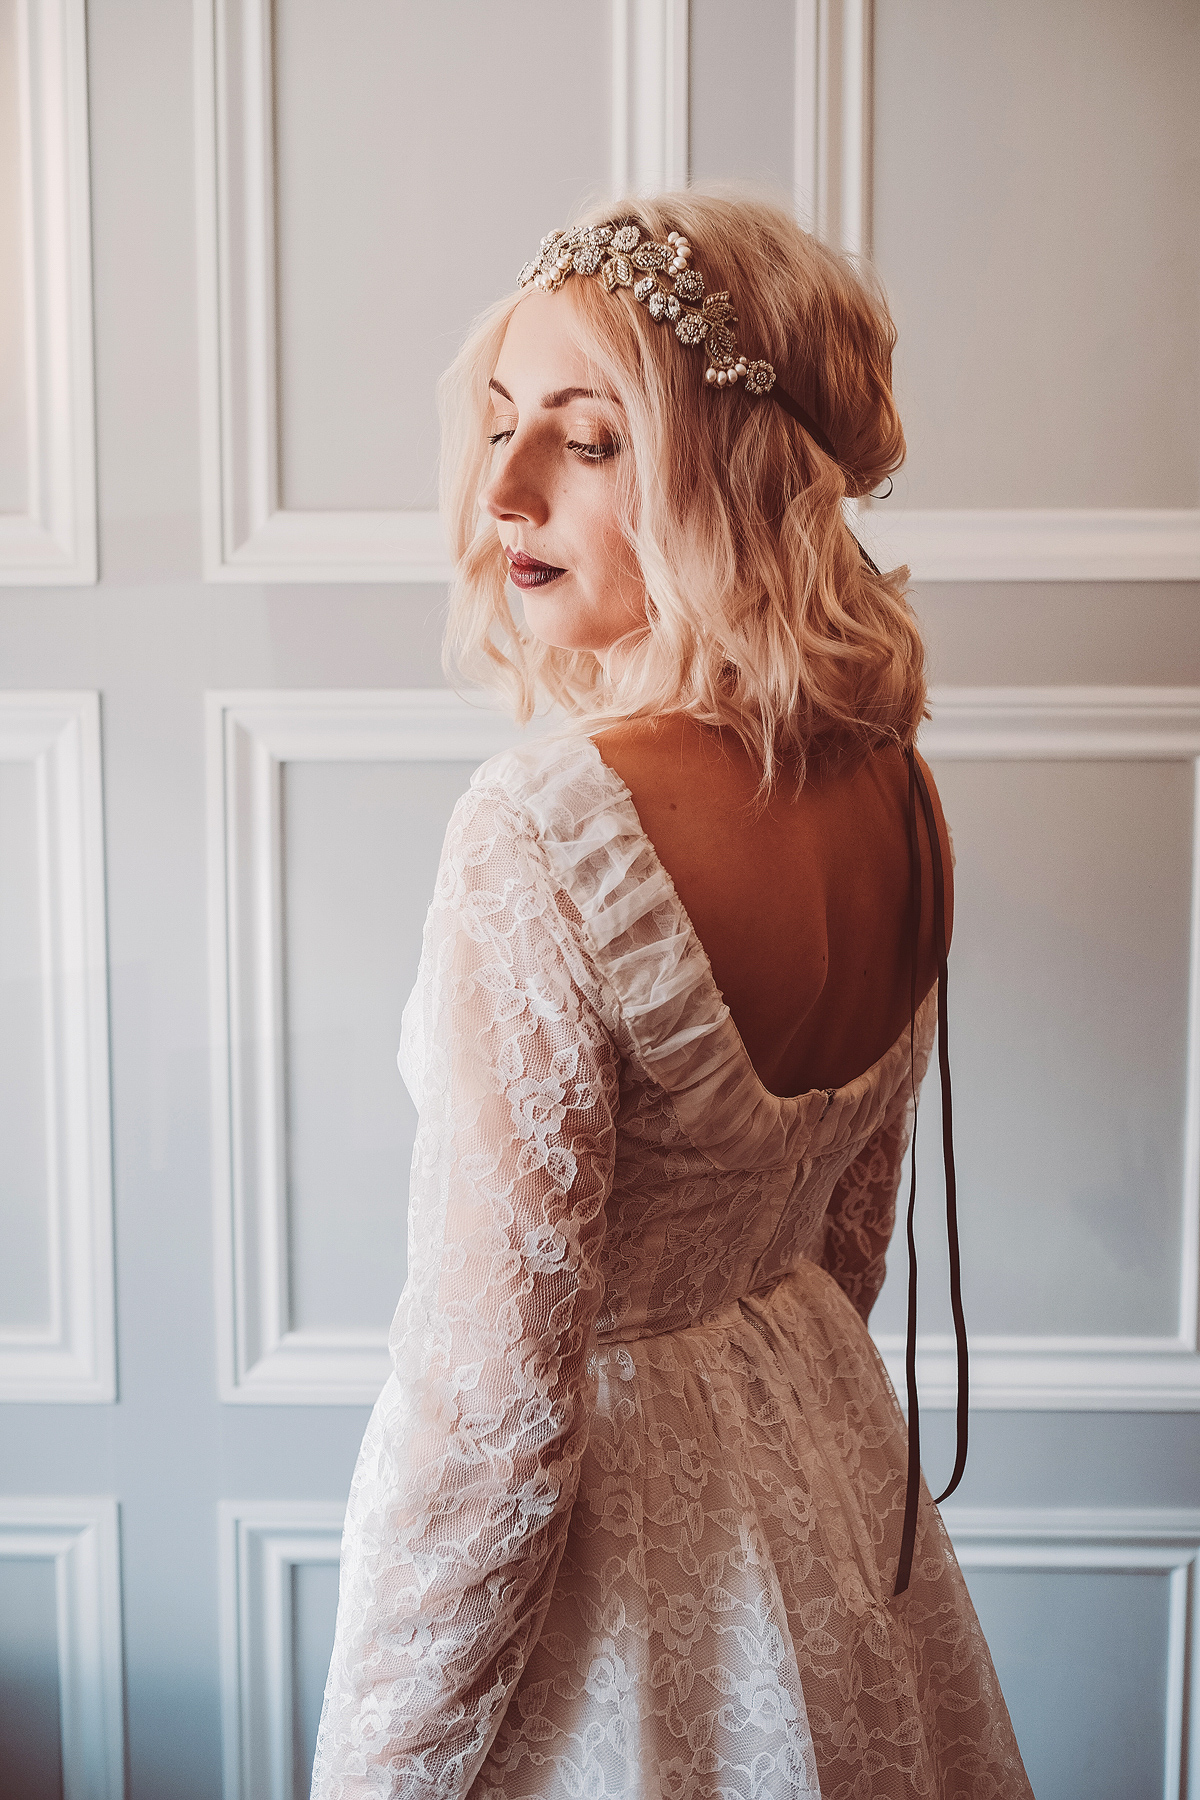 Vintage wedding dresses and bridal fashion from the 1940's, 1950's, 1960's and 1970's, from Story of My Dress. Images by Lemonade Pictures.